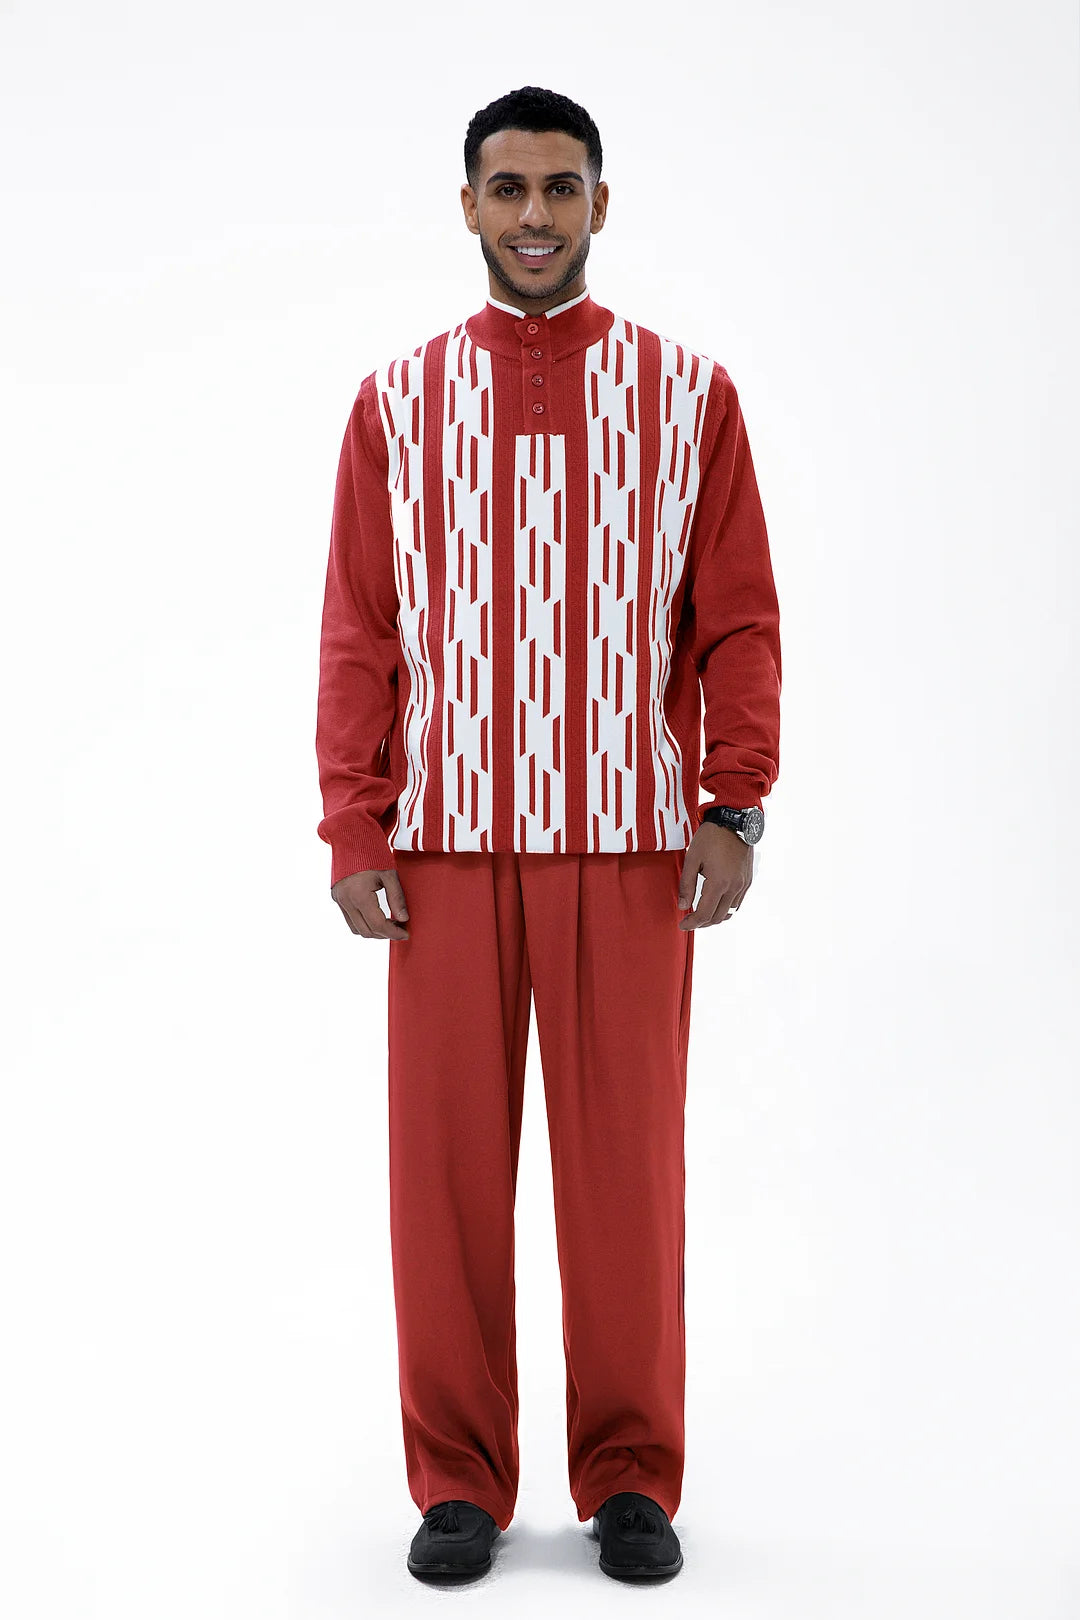 Red Knitted Walking Suit Long Sleeve Suit